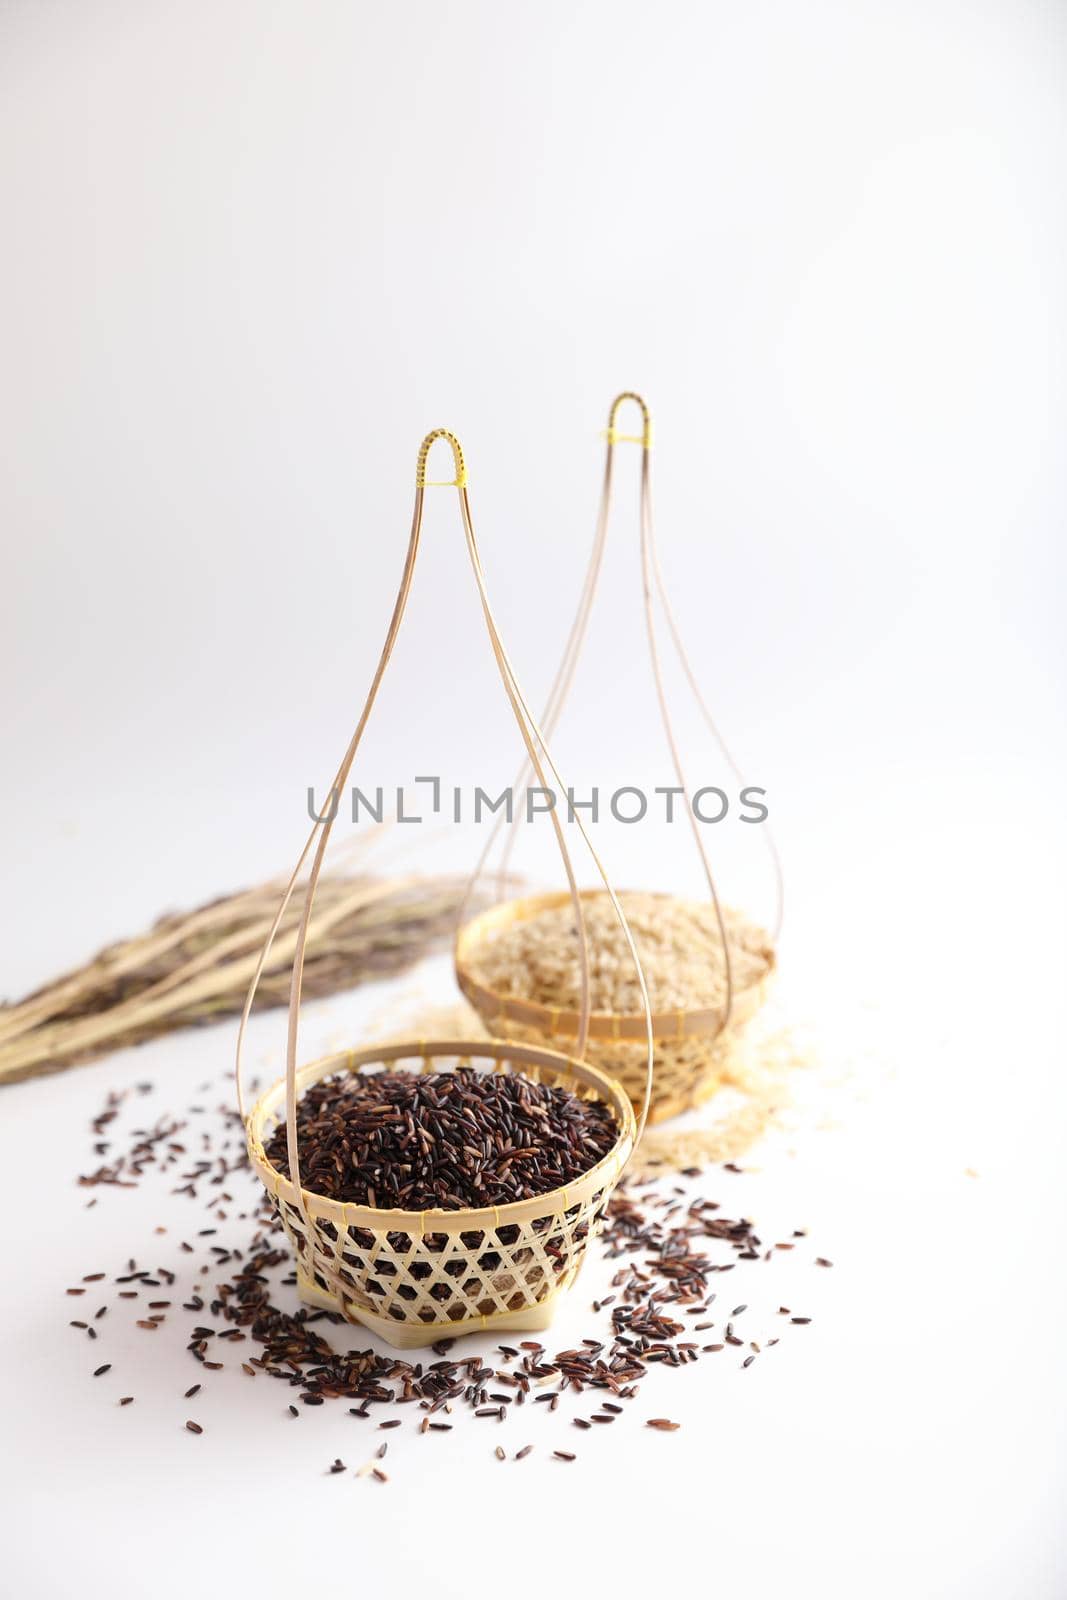 Organic raw brown rice and riceberry rice on Wicker basket in close up